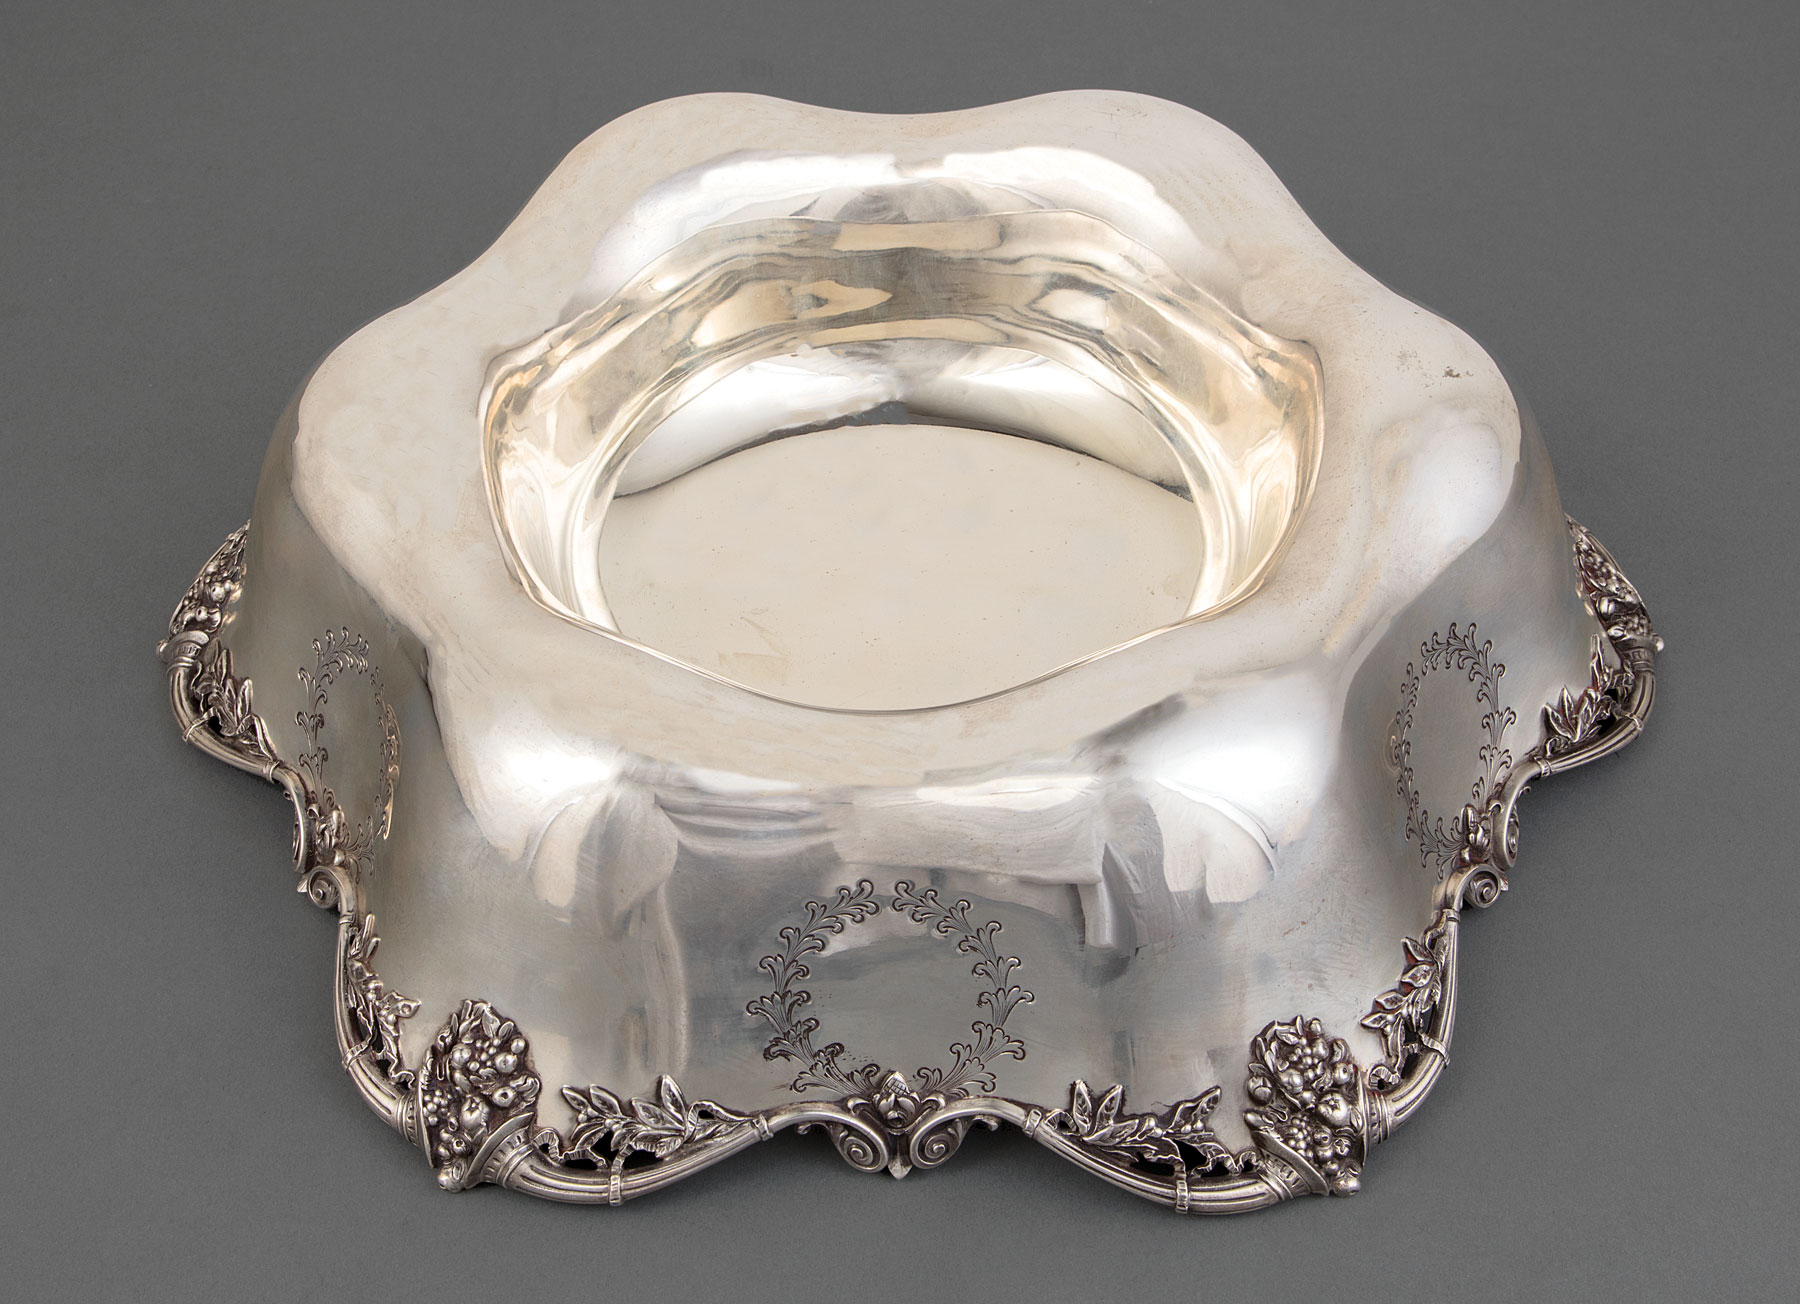 Mauser Sterling Silver Centerbowl in the Neoclassical Taste, act. Mount Vernon, NY, 1892-1913,